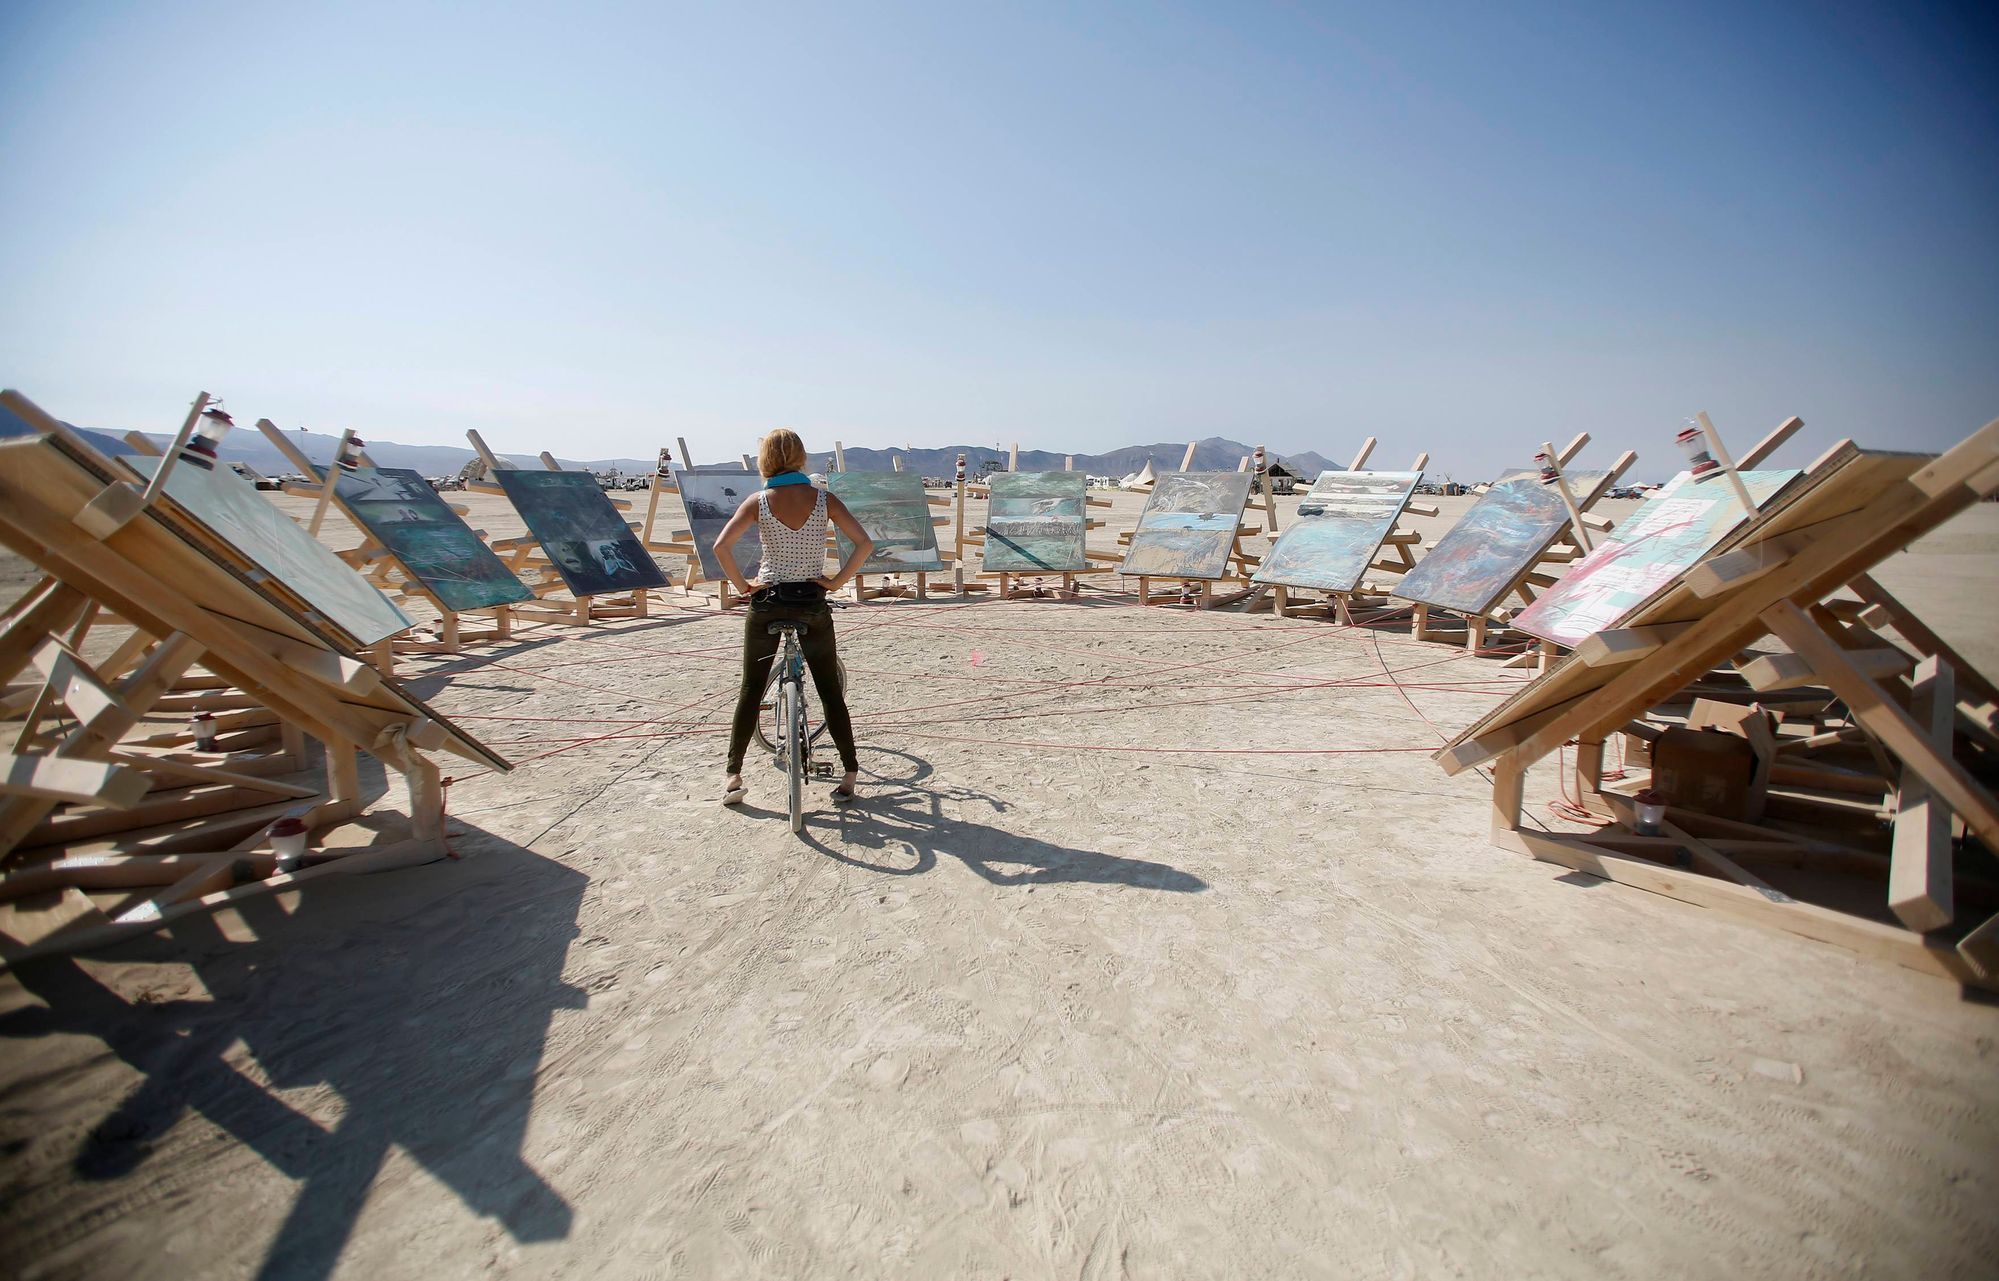 Lacey Redd examines an art installation on the last day of the Burning Man 2014 &quot;Caravansary&quot; arts and music festival in the Black Rock Desert of Nevada